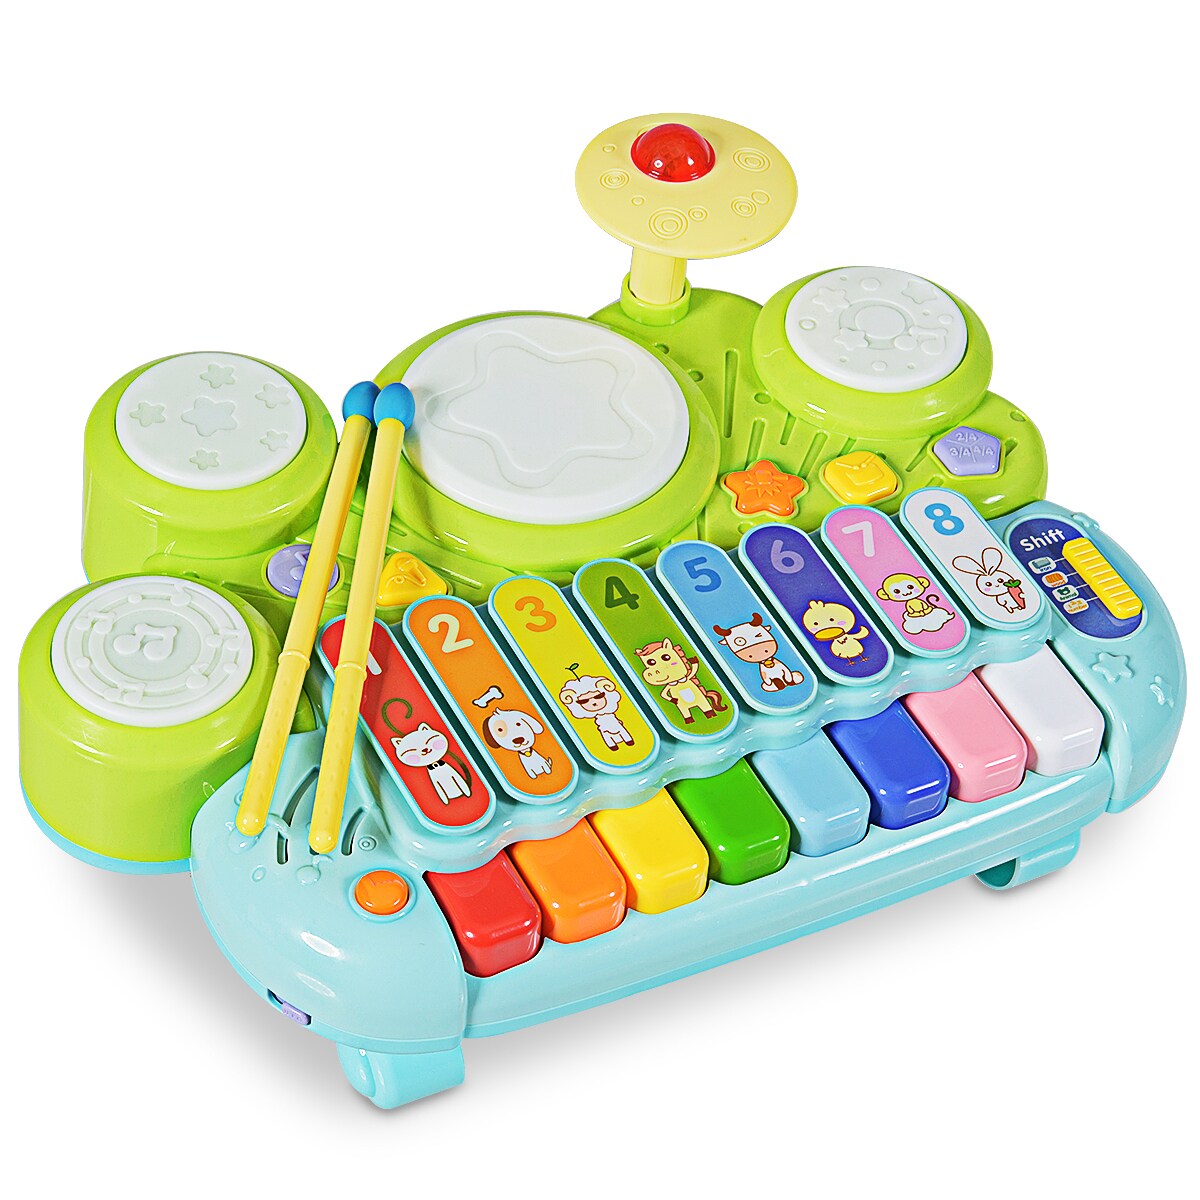 Gymax 3-in-1 Drum Xylophone Piano Keyboard Set Electronic Musical Instrument Toy